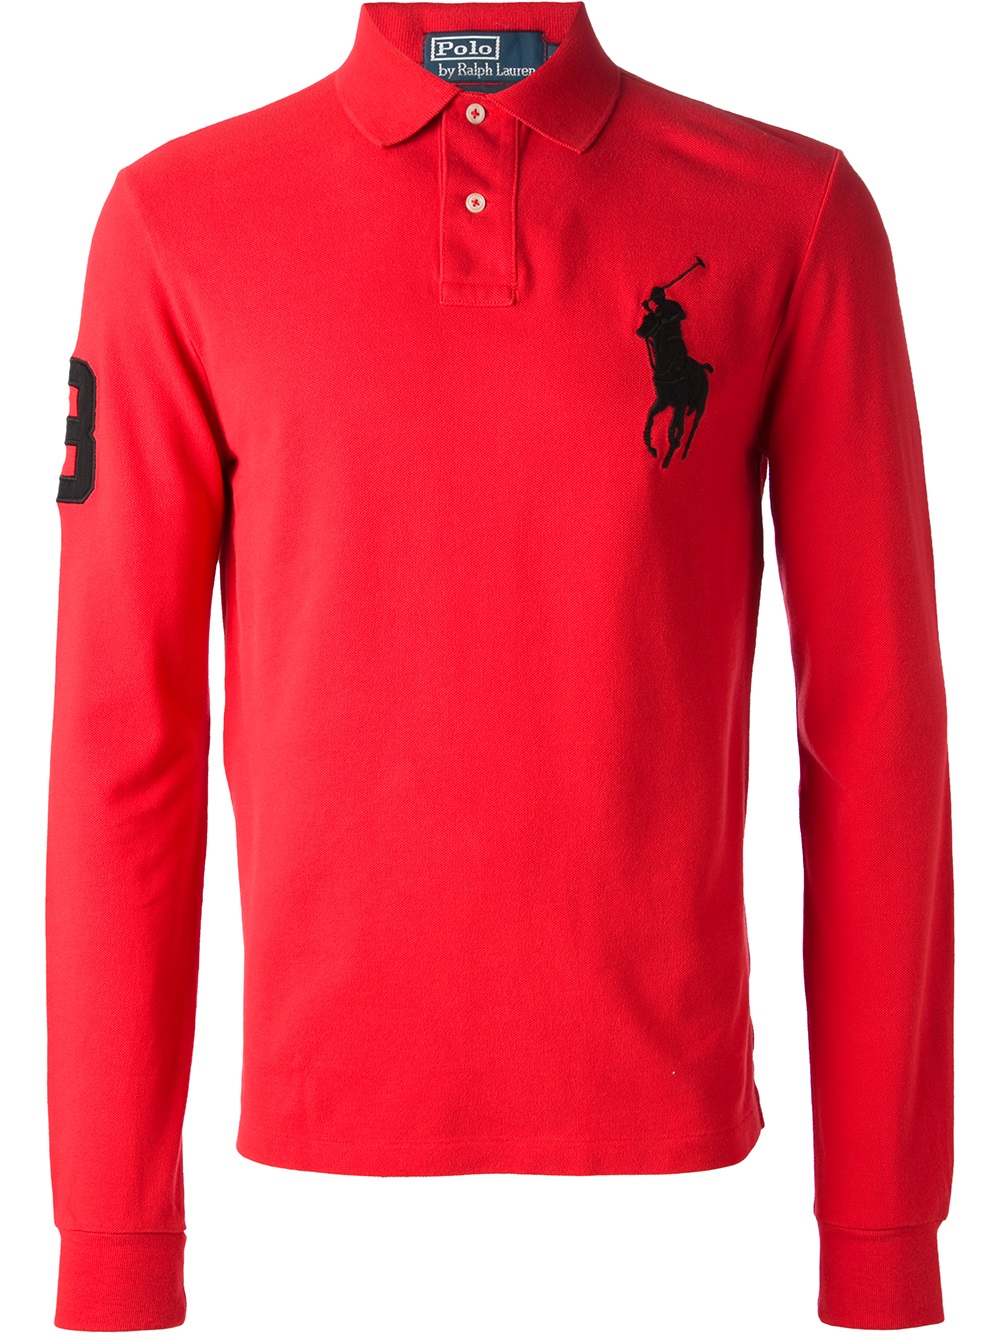 Lyst - Polo Ralph Lauren Long Sleeve Polo Shirt in Red for Men